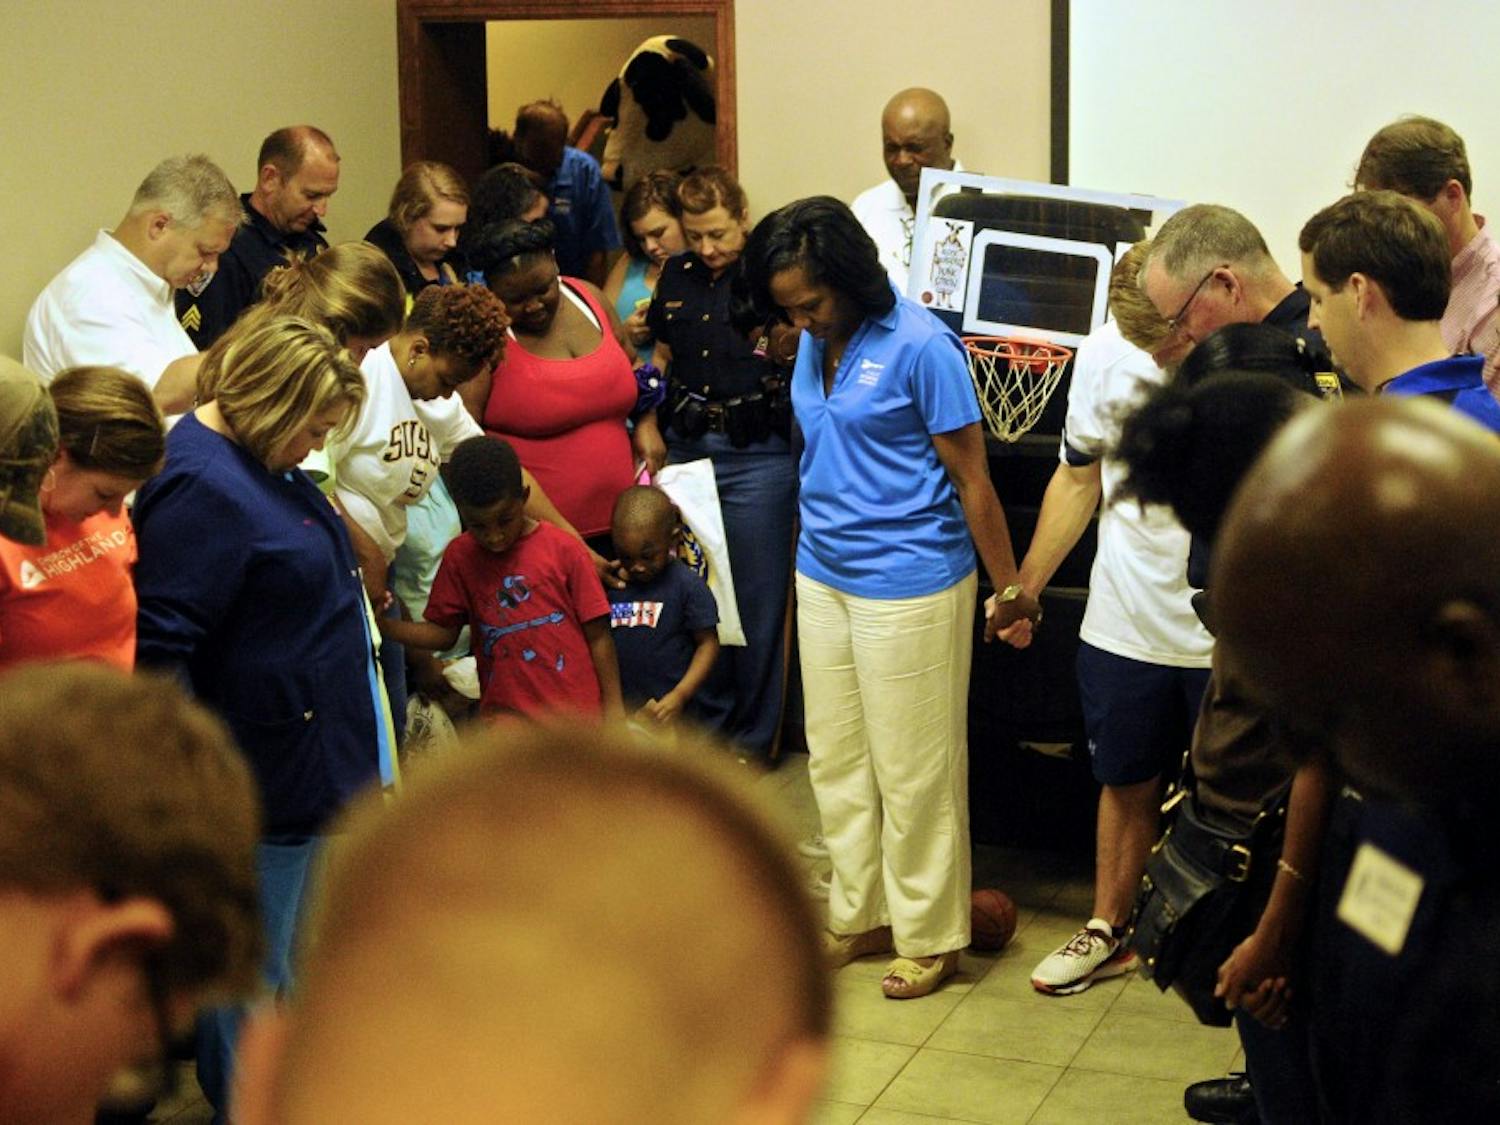 Members of the Auburn community join hands in prayer at National Night Out on Tuesday, August 2, 2016 in Auburn, Ala.